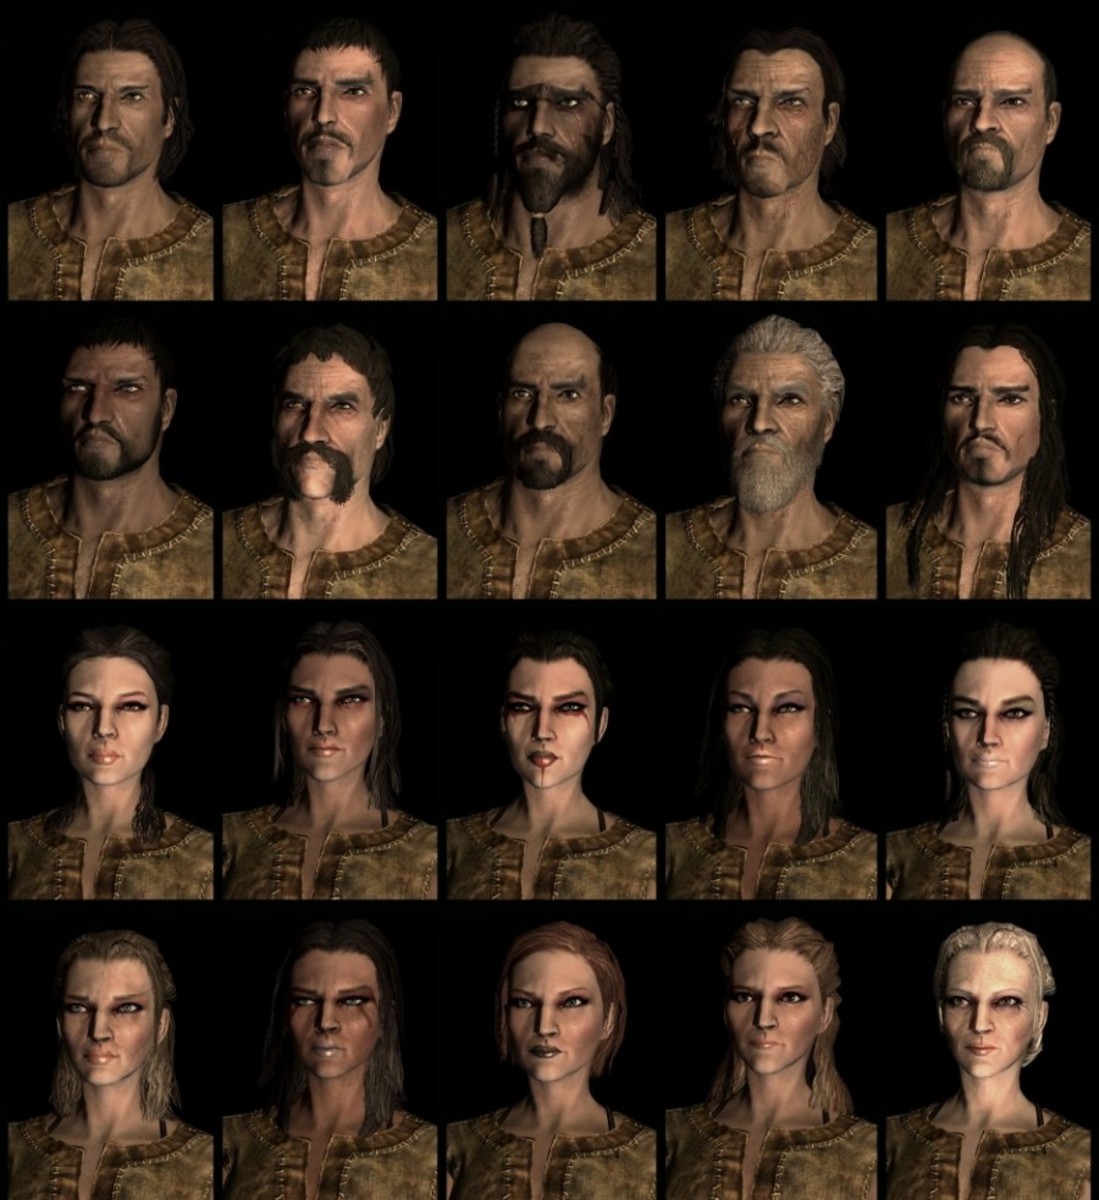 A compilation of "Skyrim" Imperial faces 